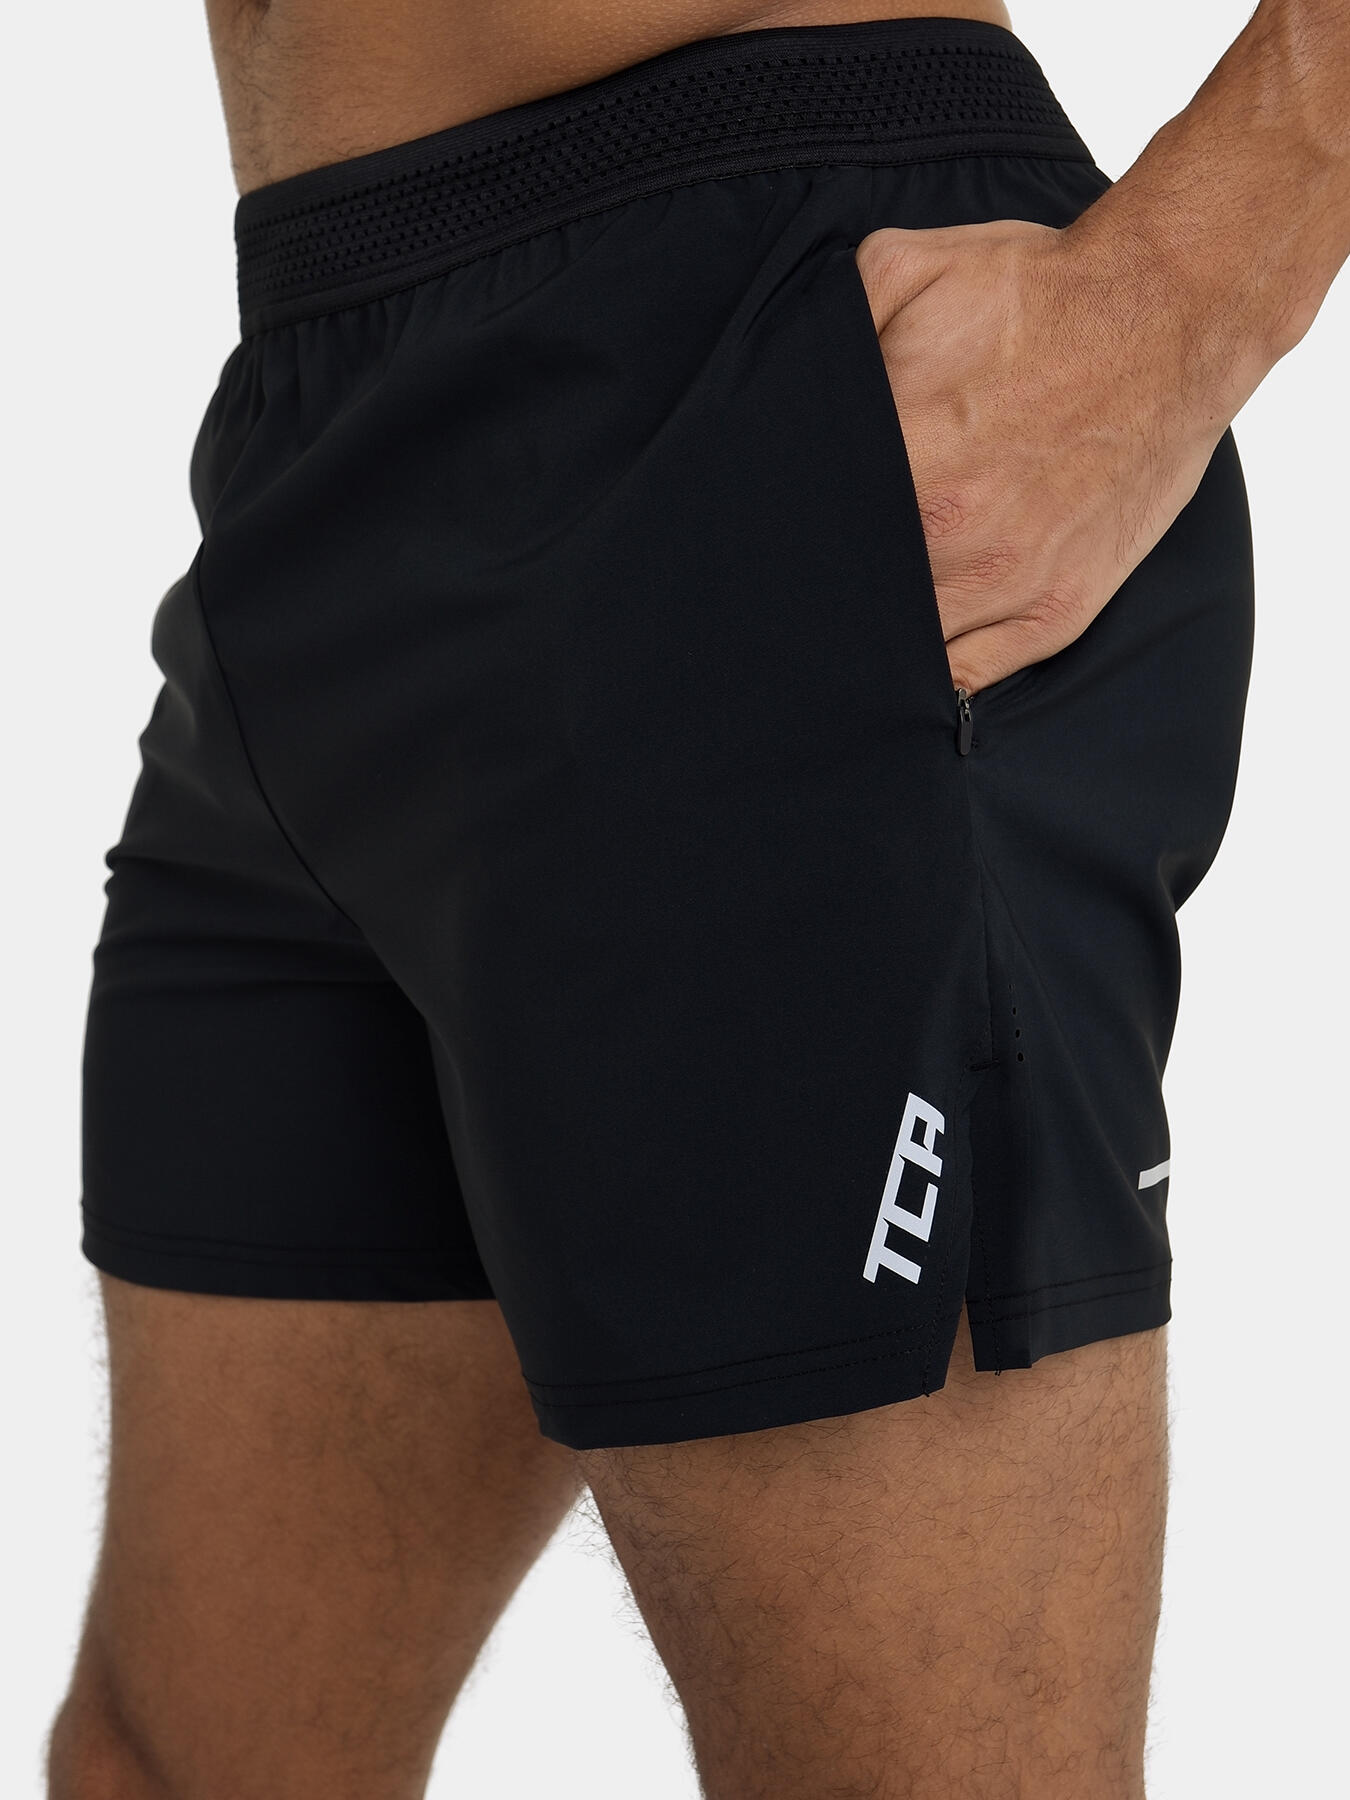 Men's Flyweight Running Shorts with Zipped Pockets - Black Stealth 3/5